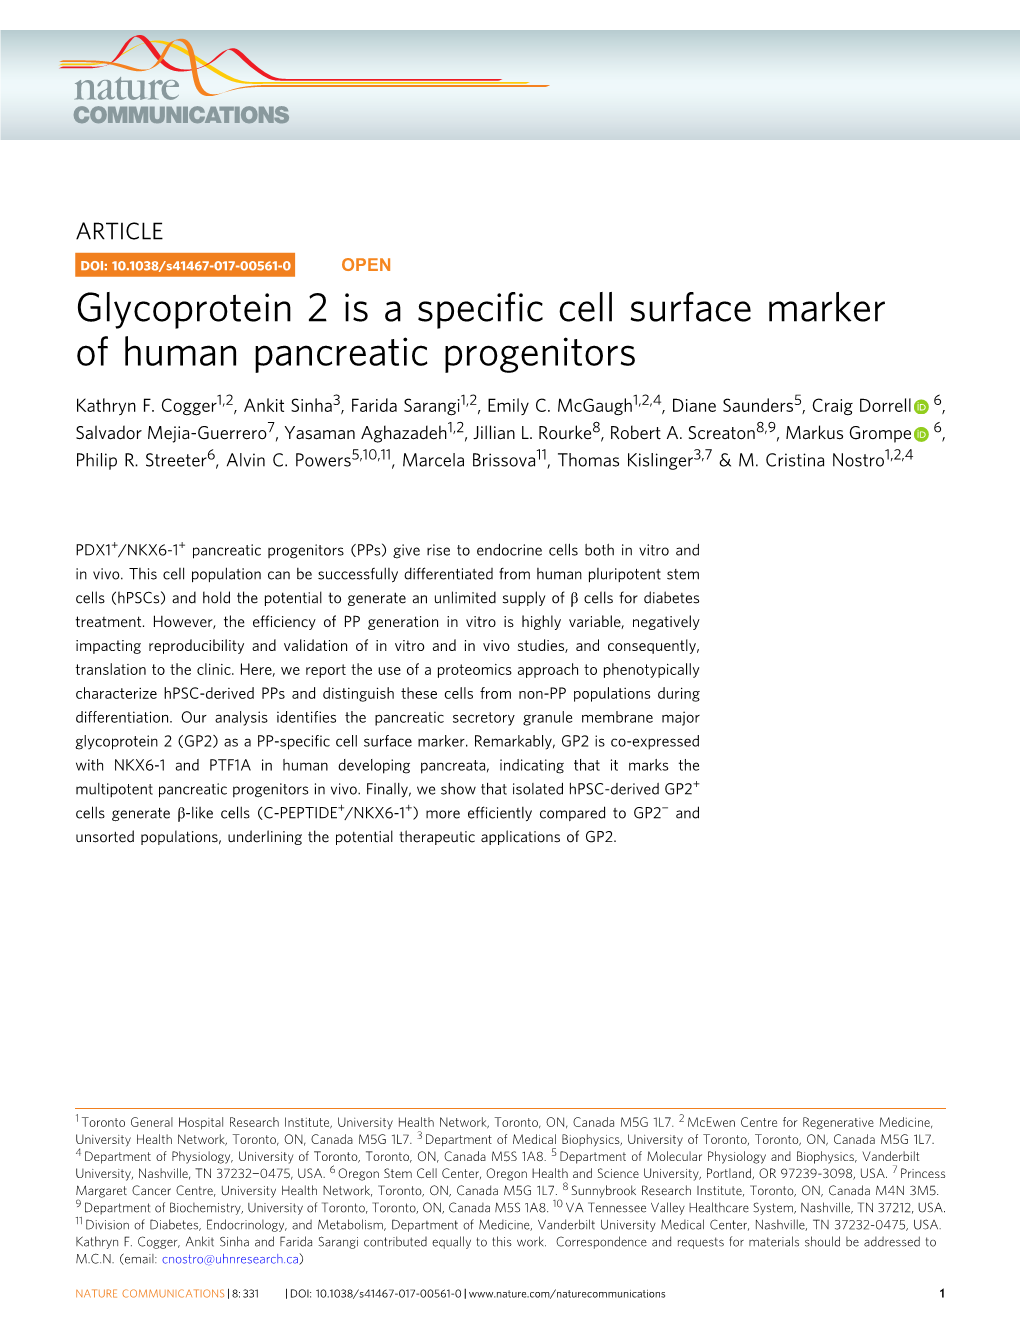 Glycoprotein 2 Is a Specific Cell Surface Marker of Human Pancreatic